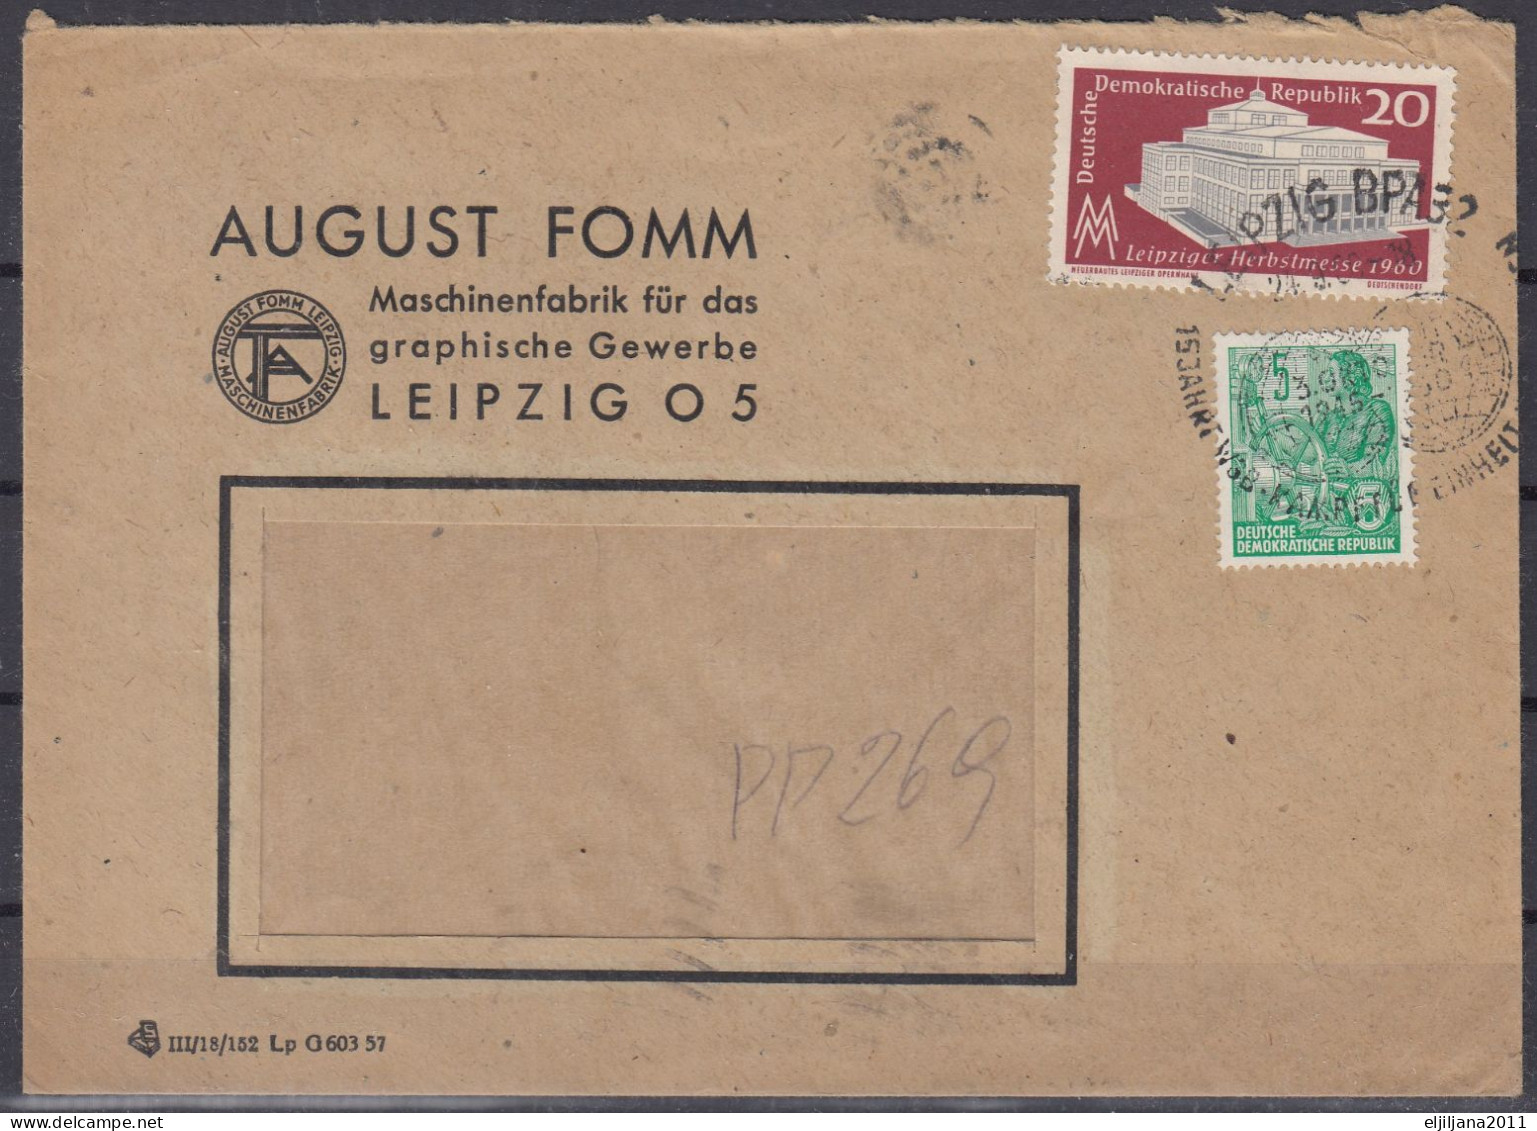 SALE !! 50 % OFF !! ⁕ Germany DDR 1960 ⁕ August Fomm, LEIPZIG Cover With A Window To Zagreb - Umschläge - Gebraucht